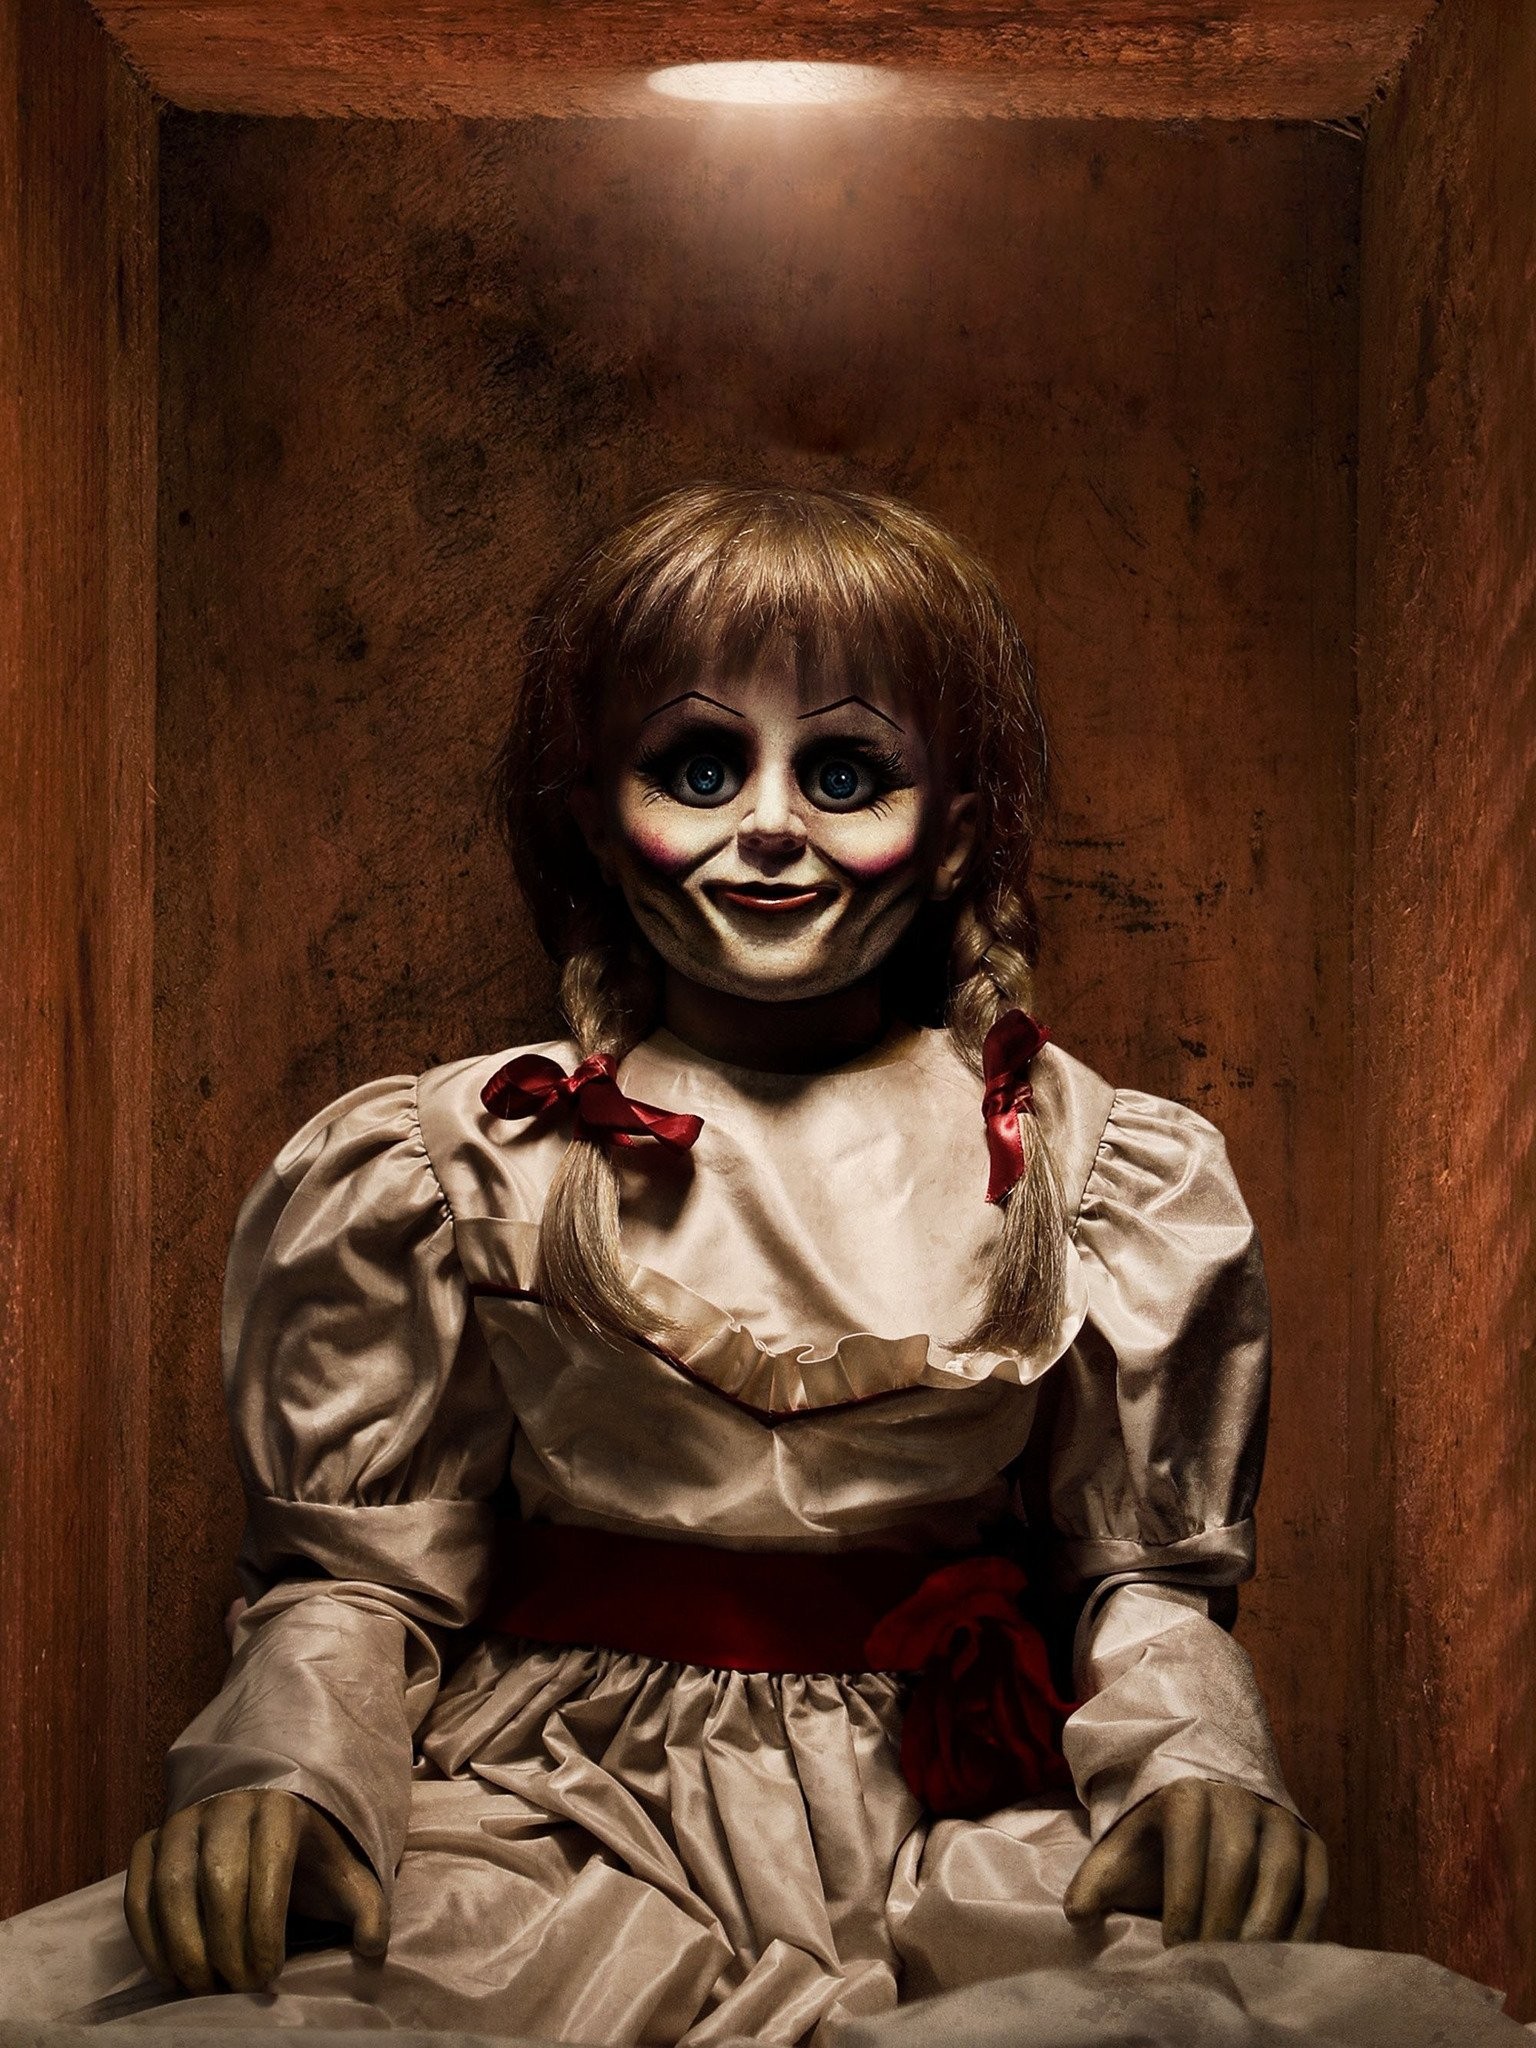 Annabelle Comes Home: Watch the New Trailer for Annabelle 3